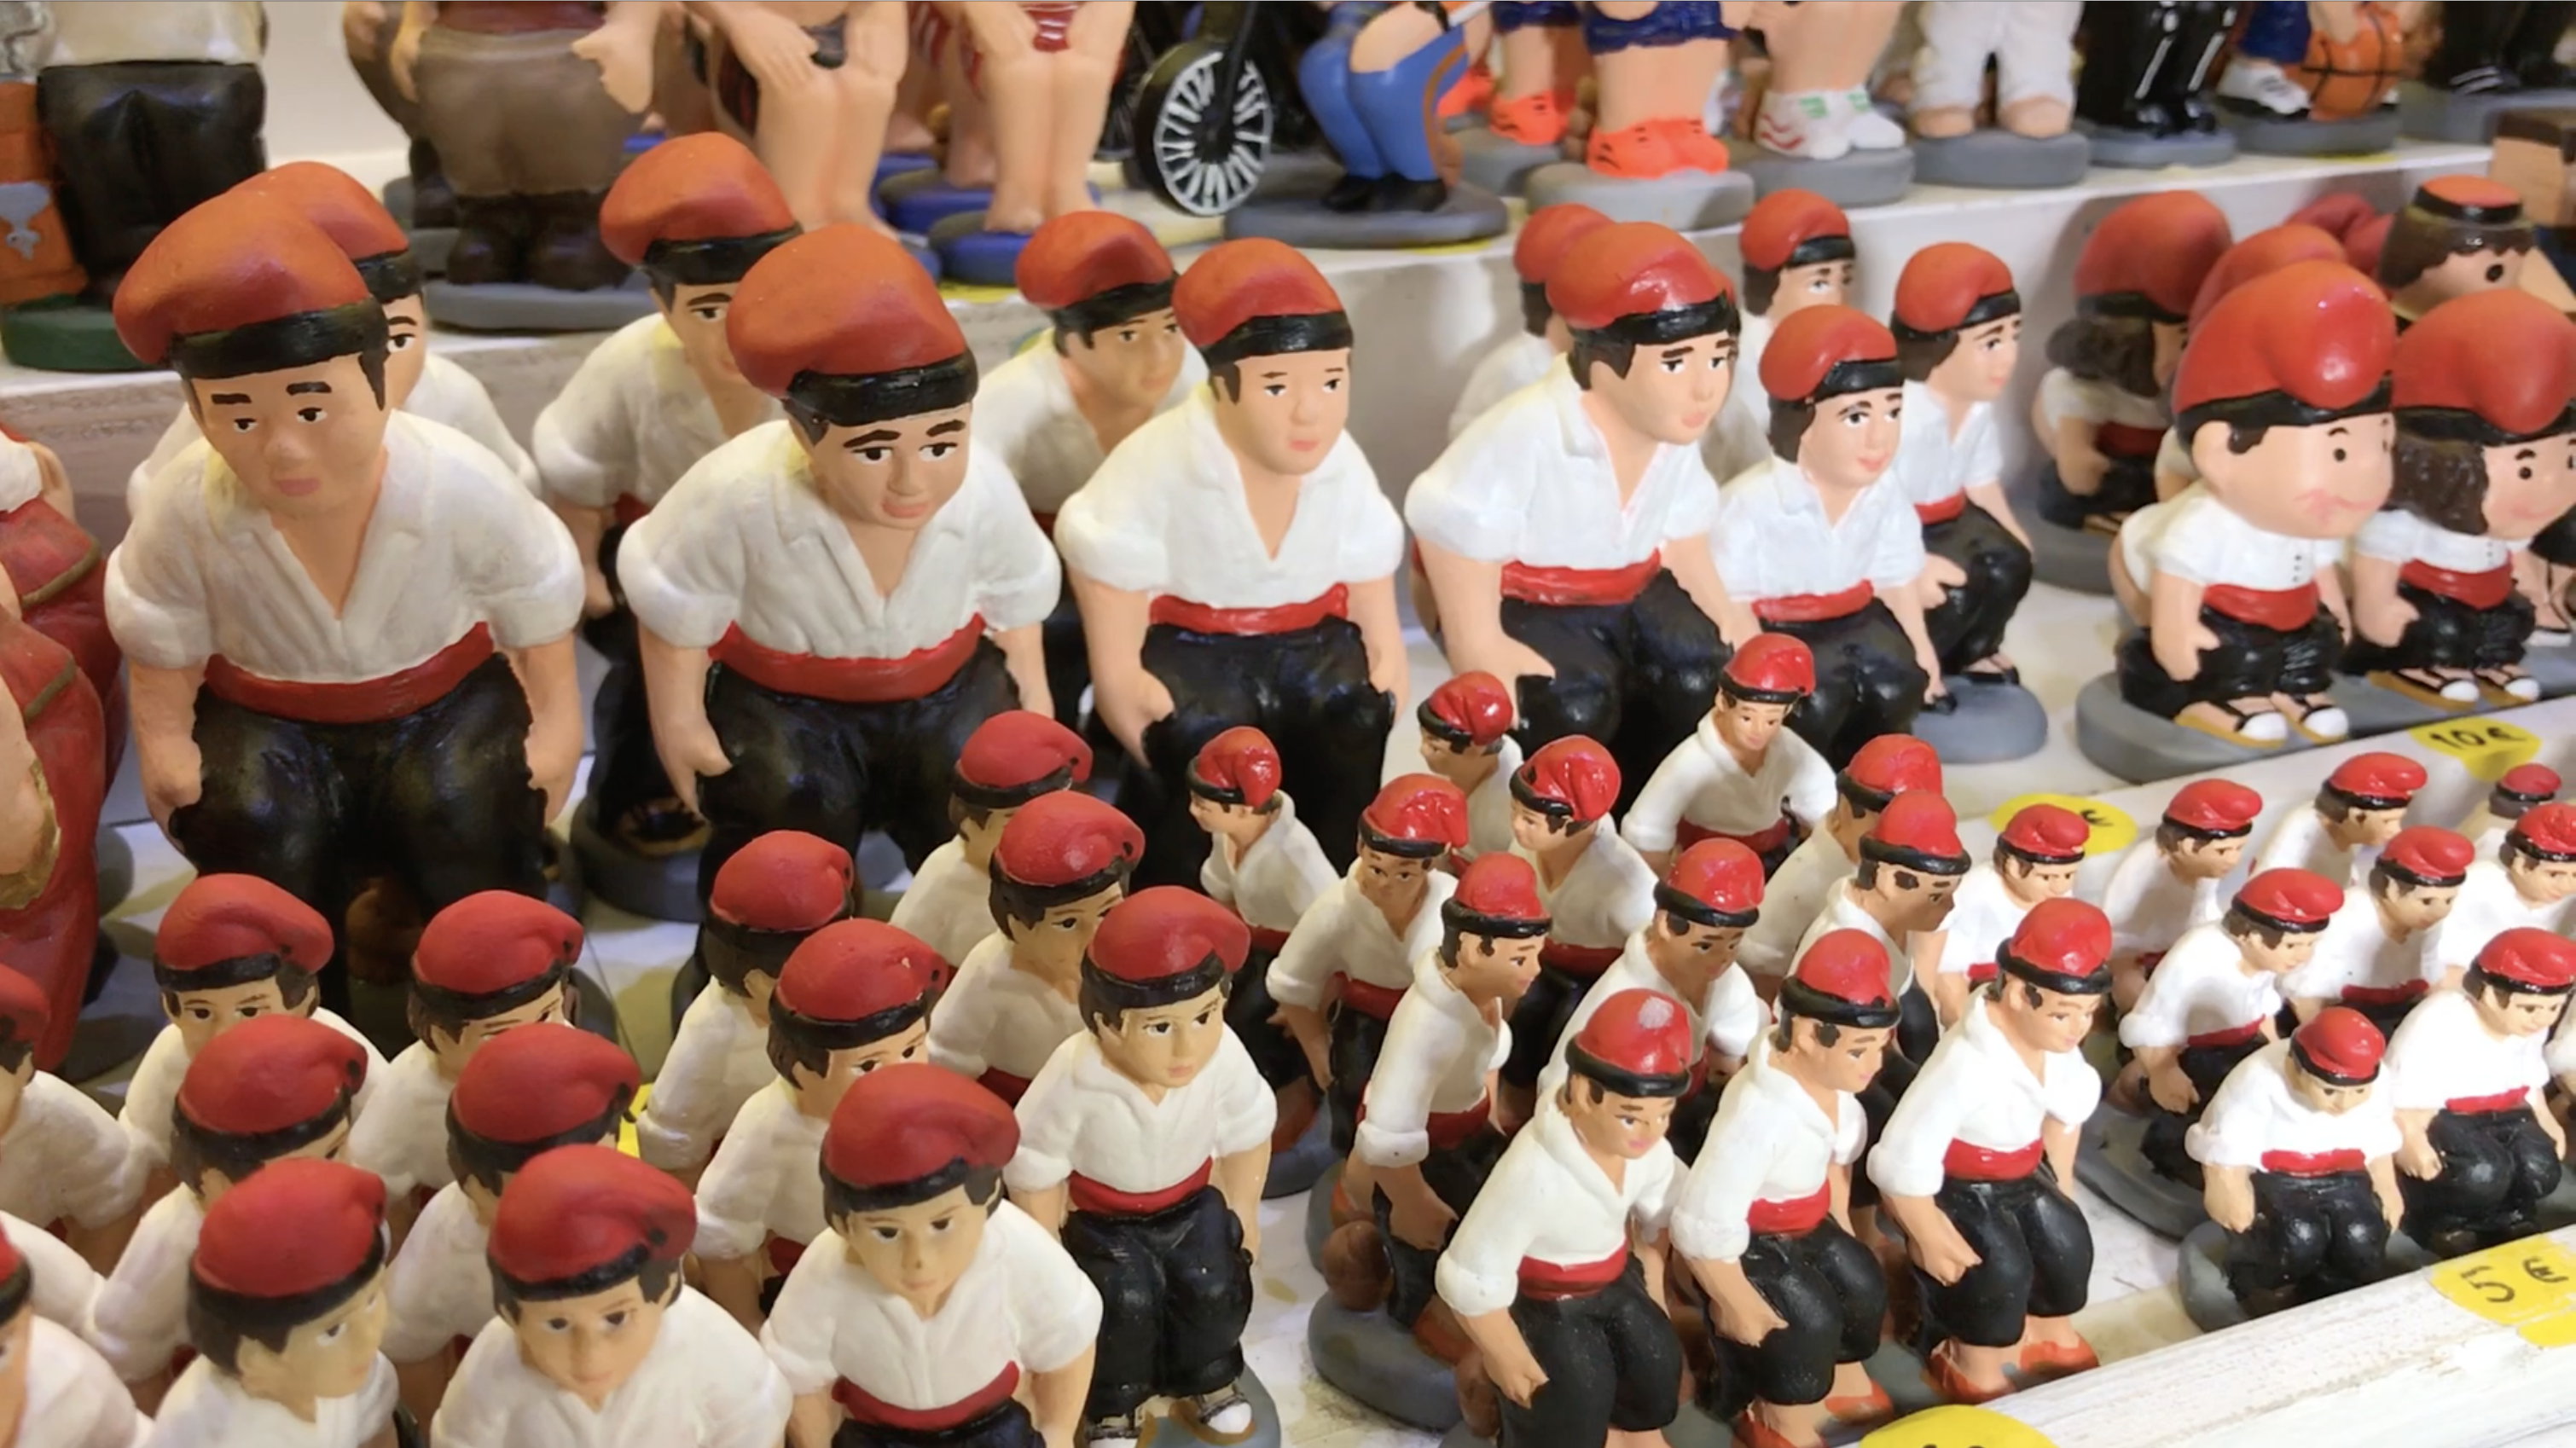 Caganer figurines at the Santa Llúcia market in Barcelona in December 2018 (by ACN)